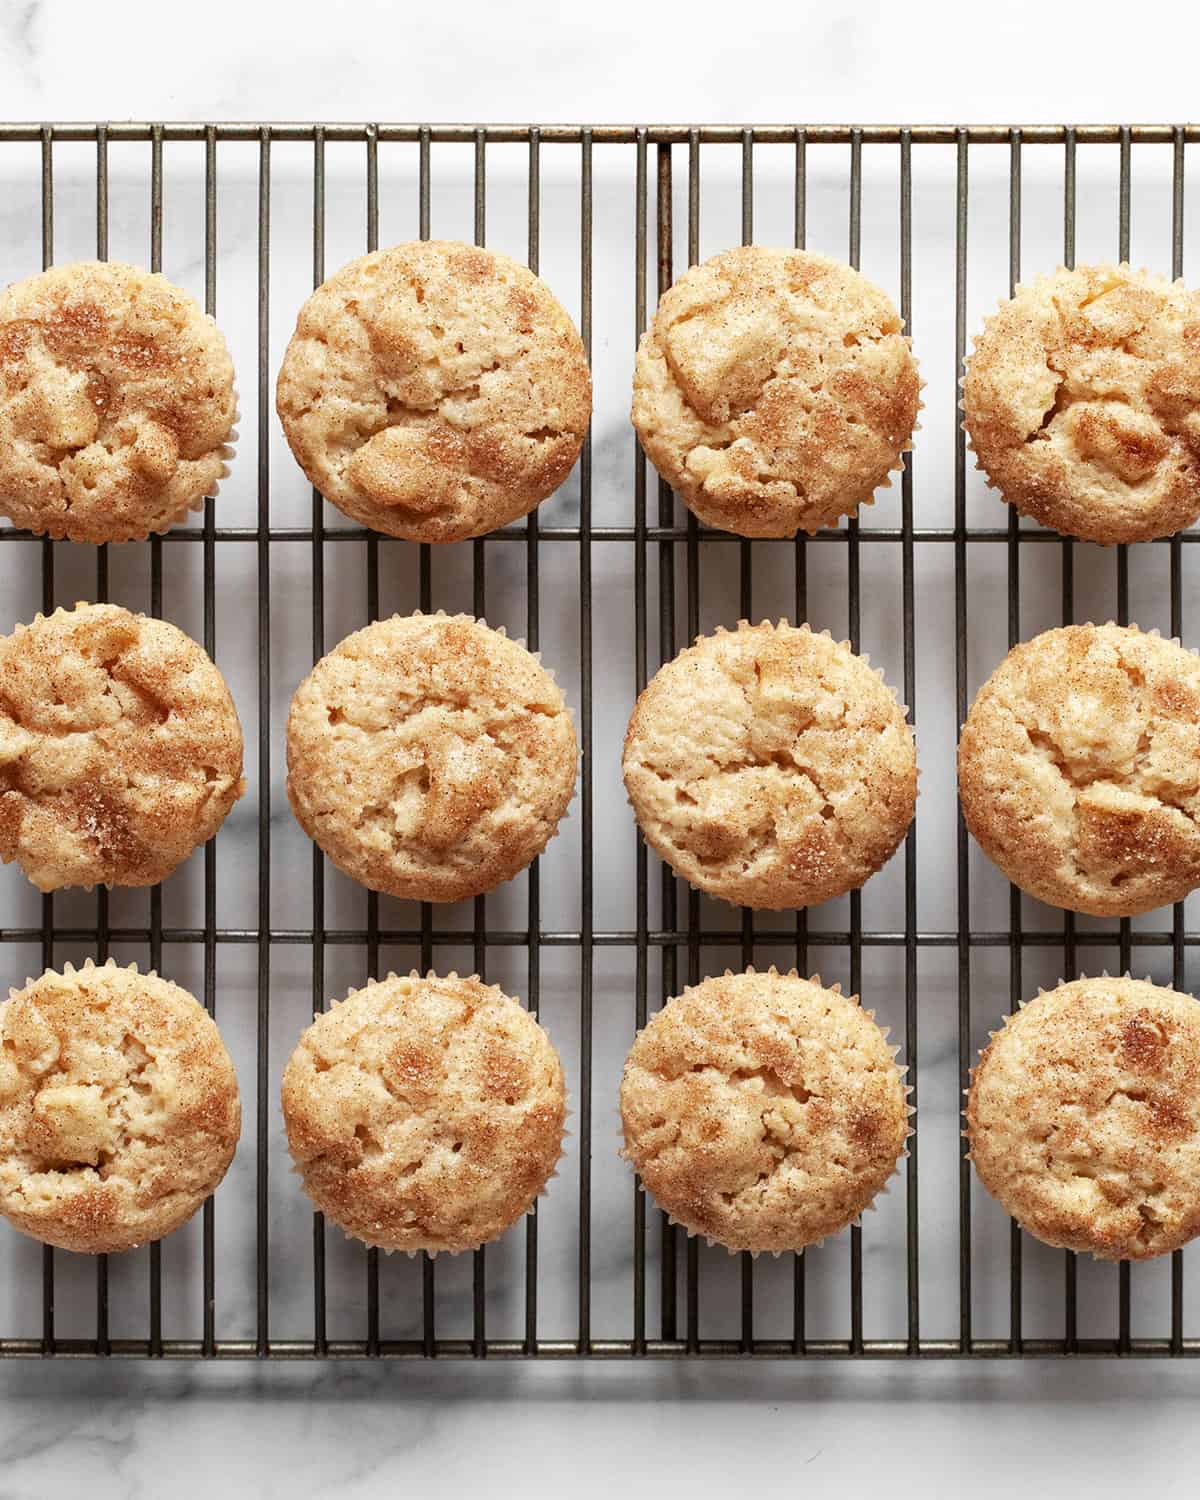 Cinnamon apple muffins cooling on a wire rack.